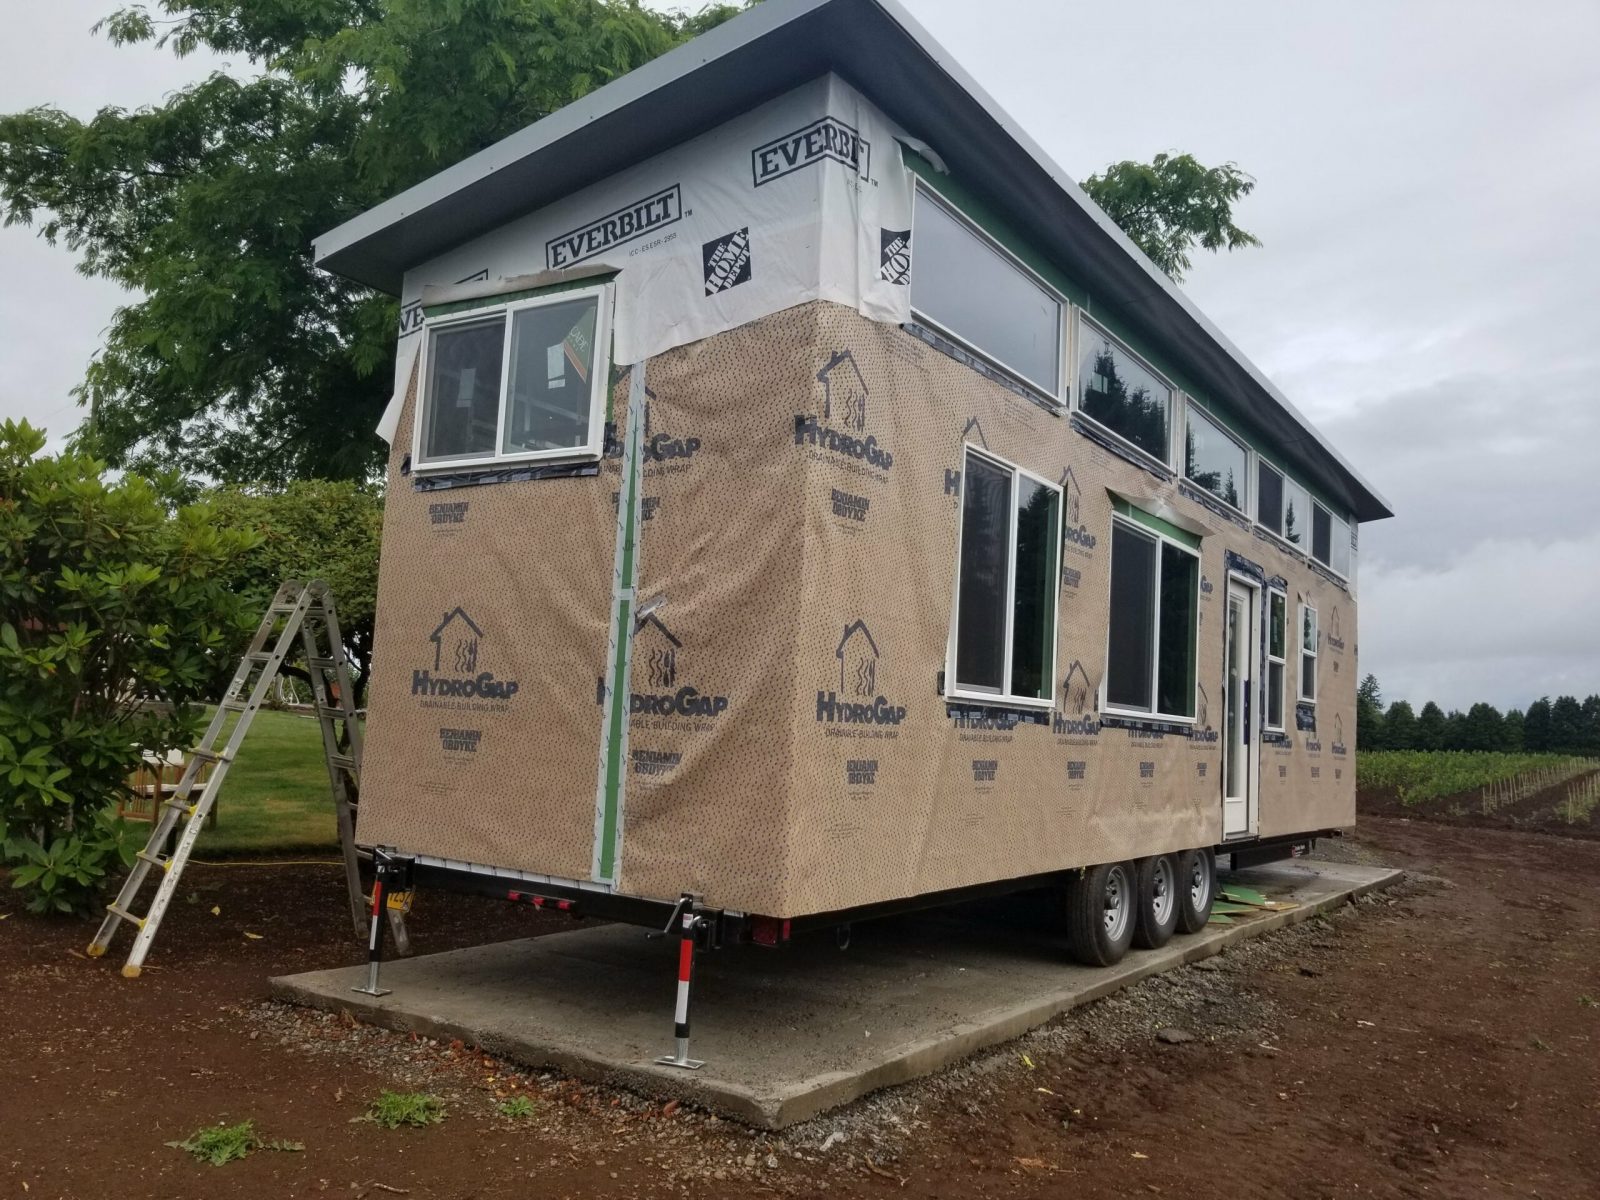 Wrap on east and south sides of the tiny house